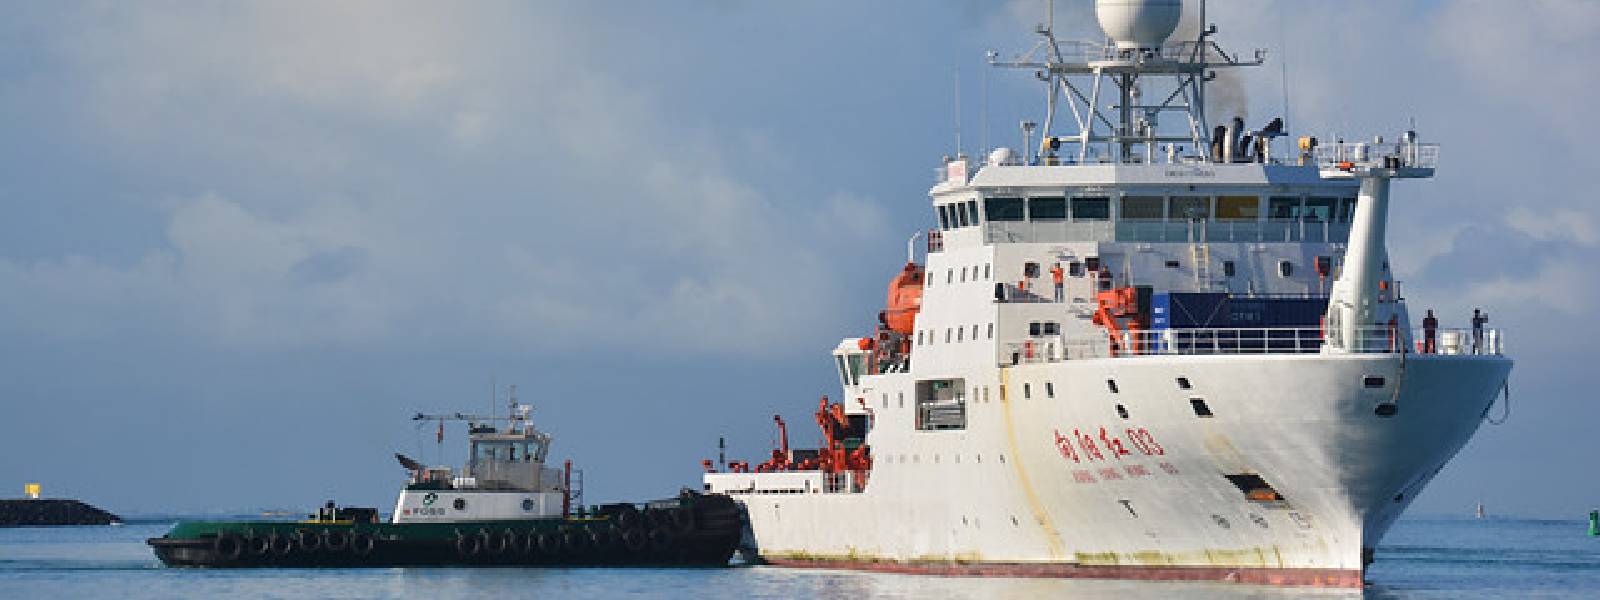 Another Chinese research ship to reach Colombo?